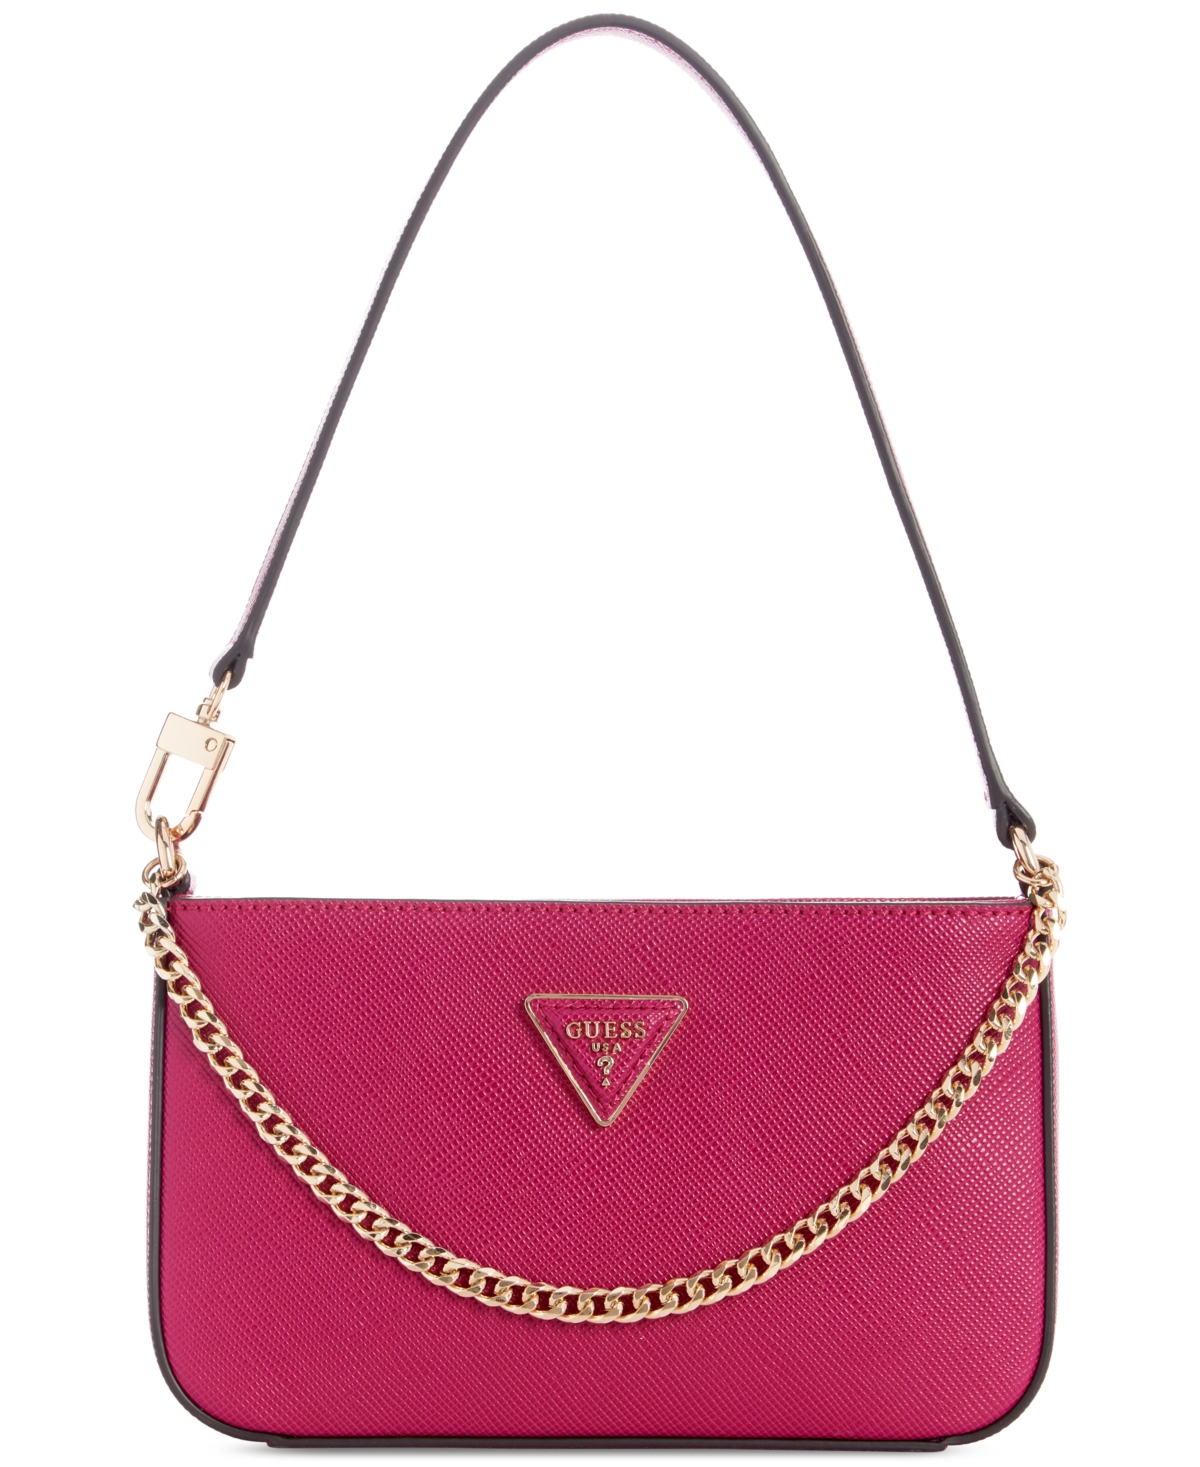 Guess Brynlee Small Top Zip Shoulder Bag